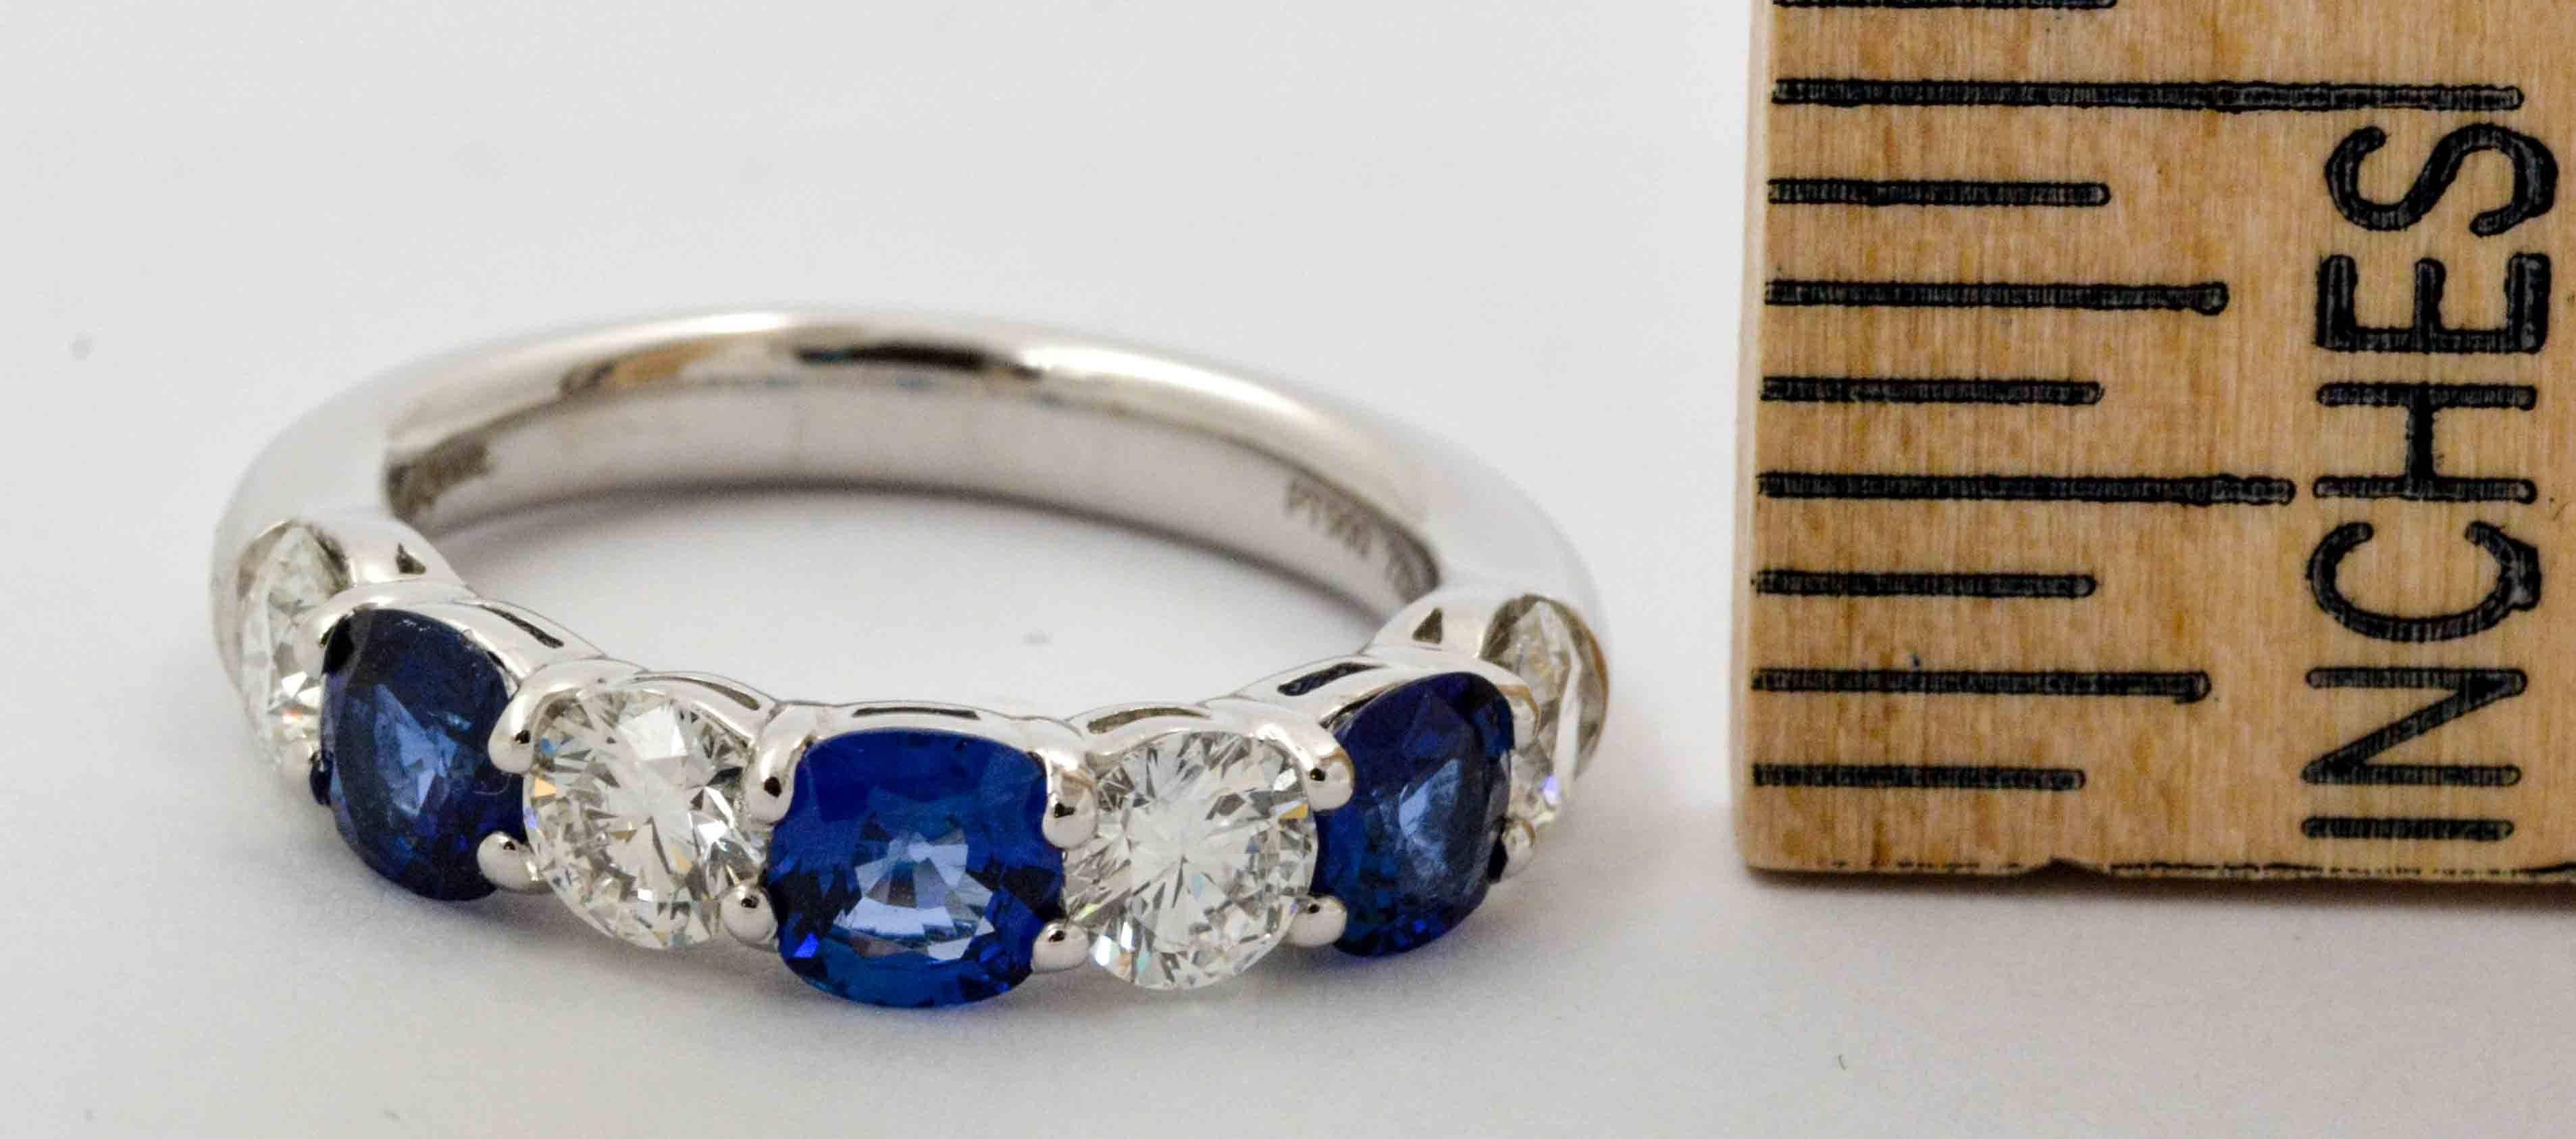 This lovely JB Star anniversary ring showcases three amazing cushion cut vivid blue sapphires which have a combined weight of 1.30 carats total.  JB Star set these amazing blue sapphires next to five beautifully contrasting round brilliant cut